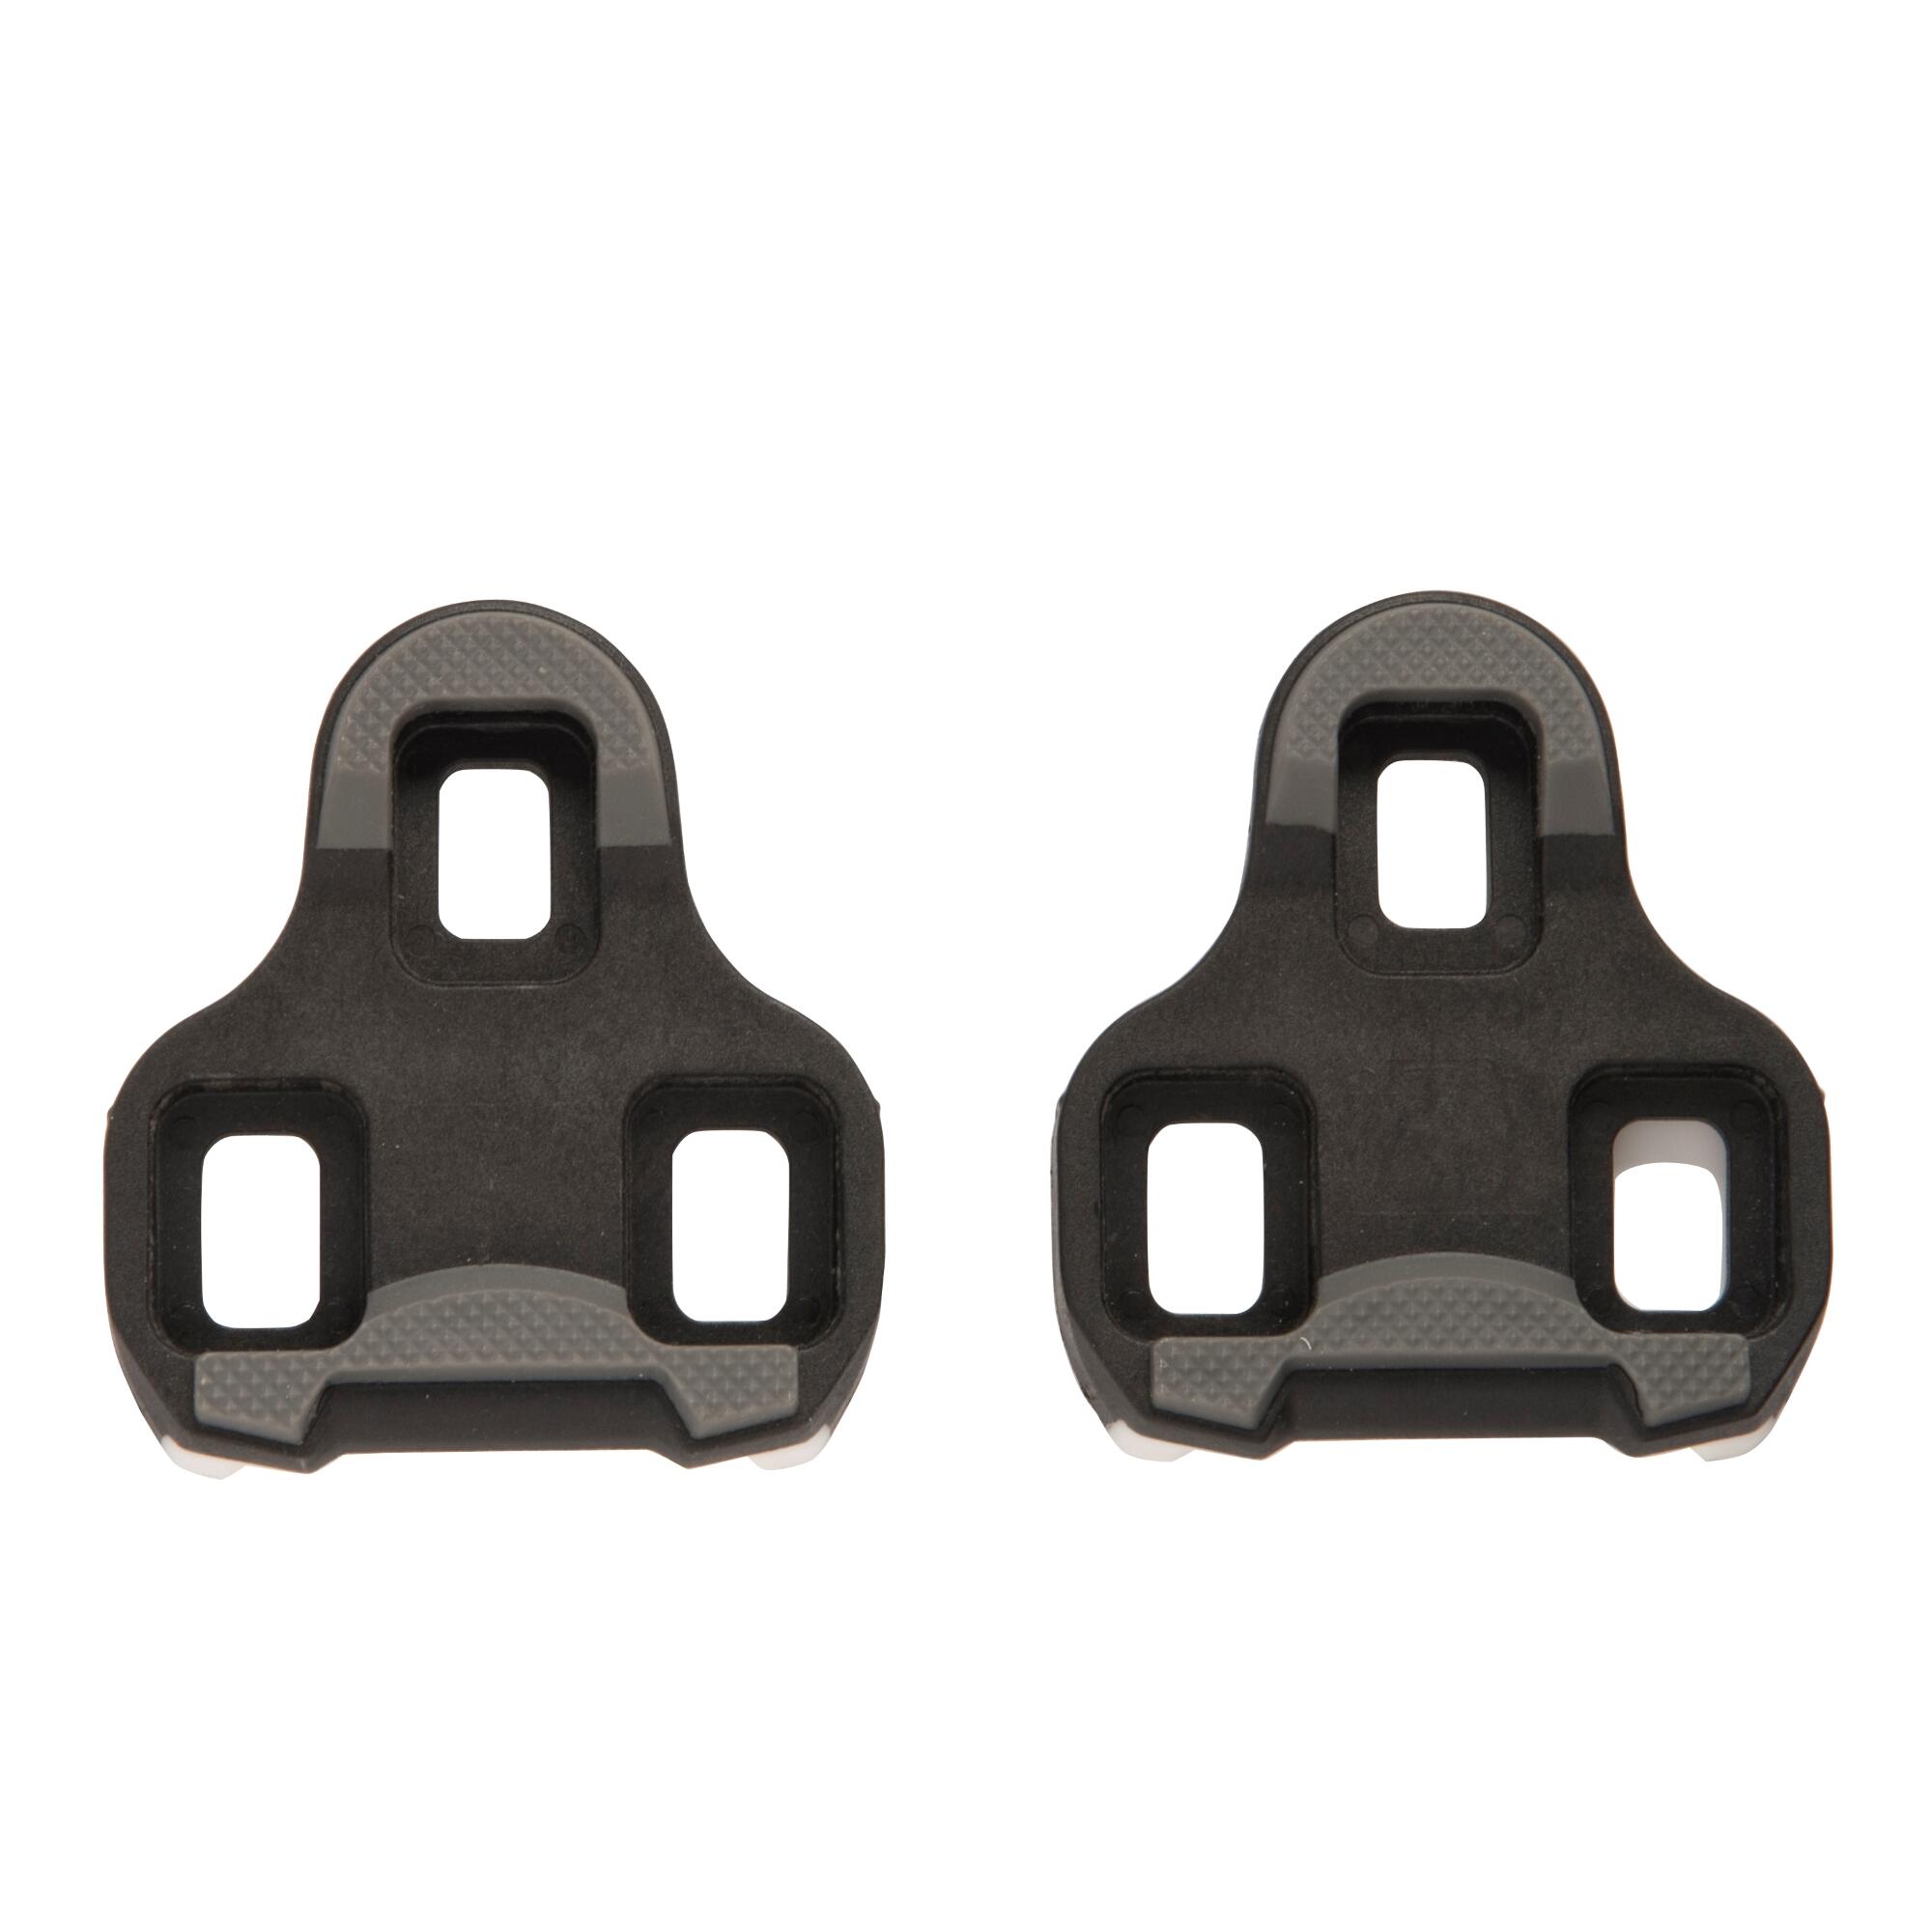 VP VP-ARC5 Look KEO Compatible Cleats 4.5 Degree Floating 